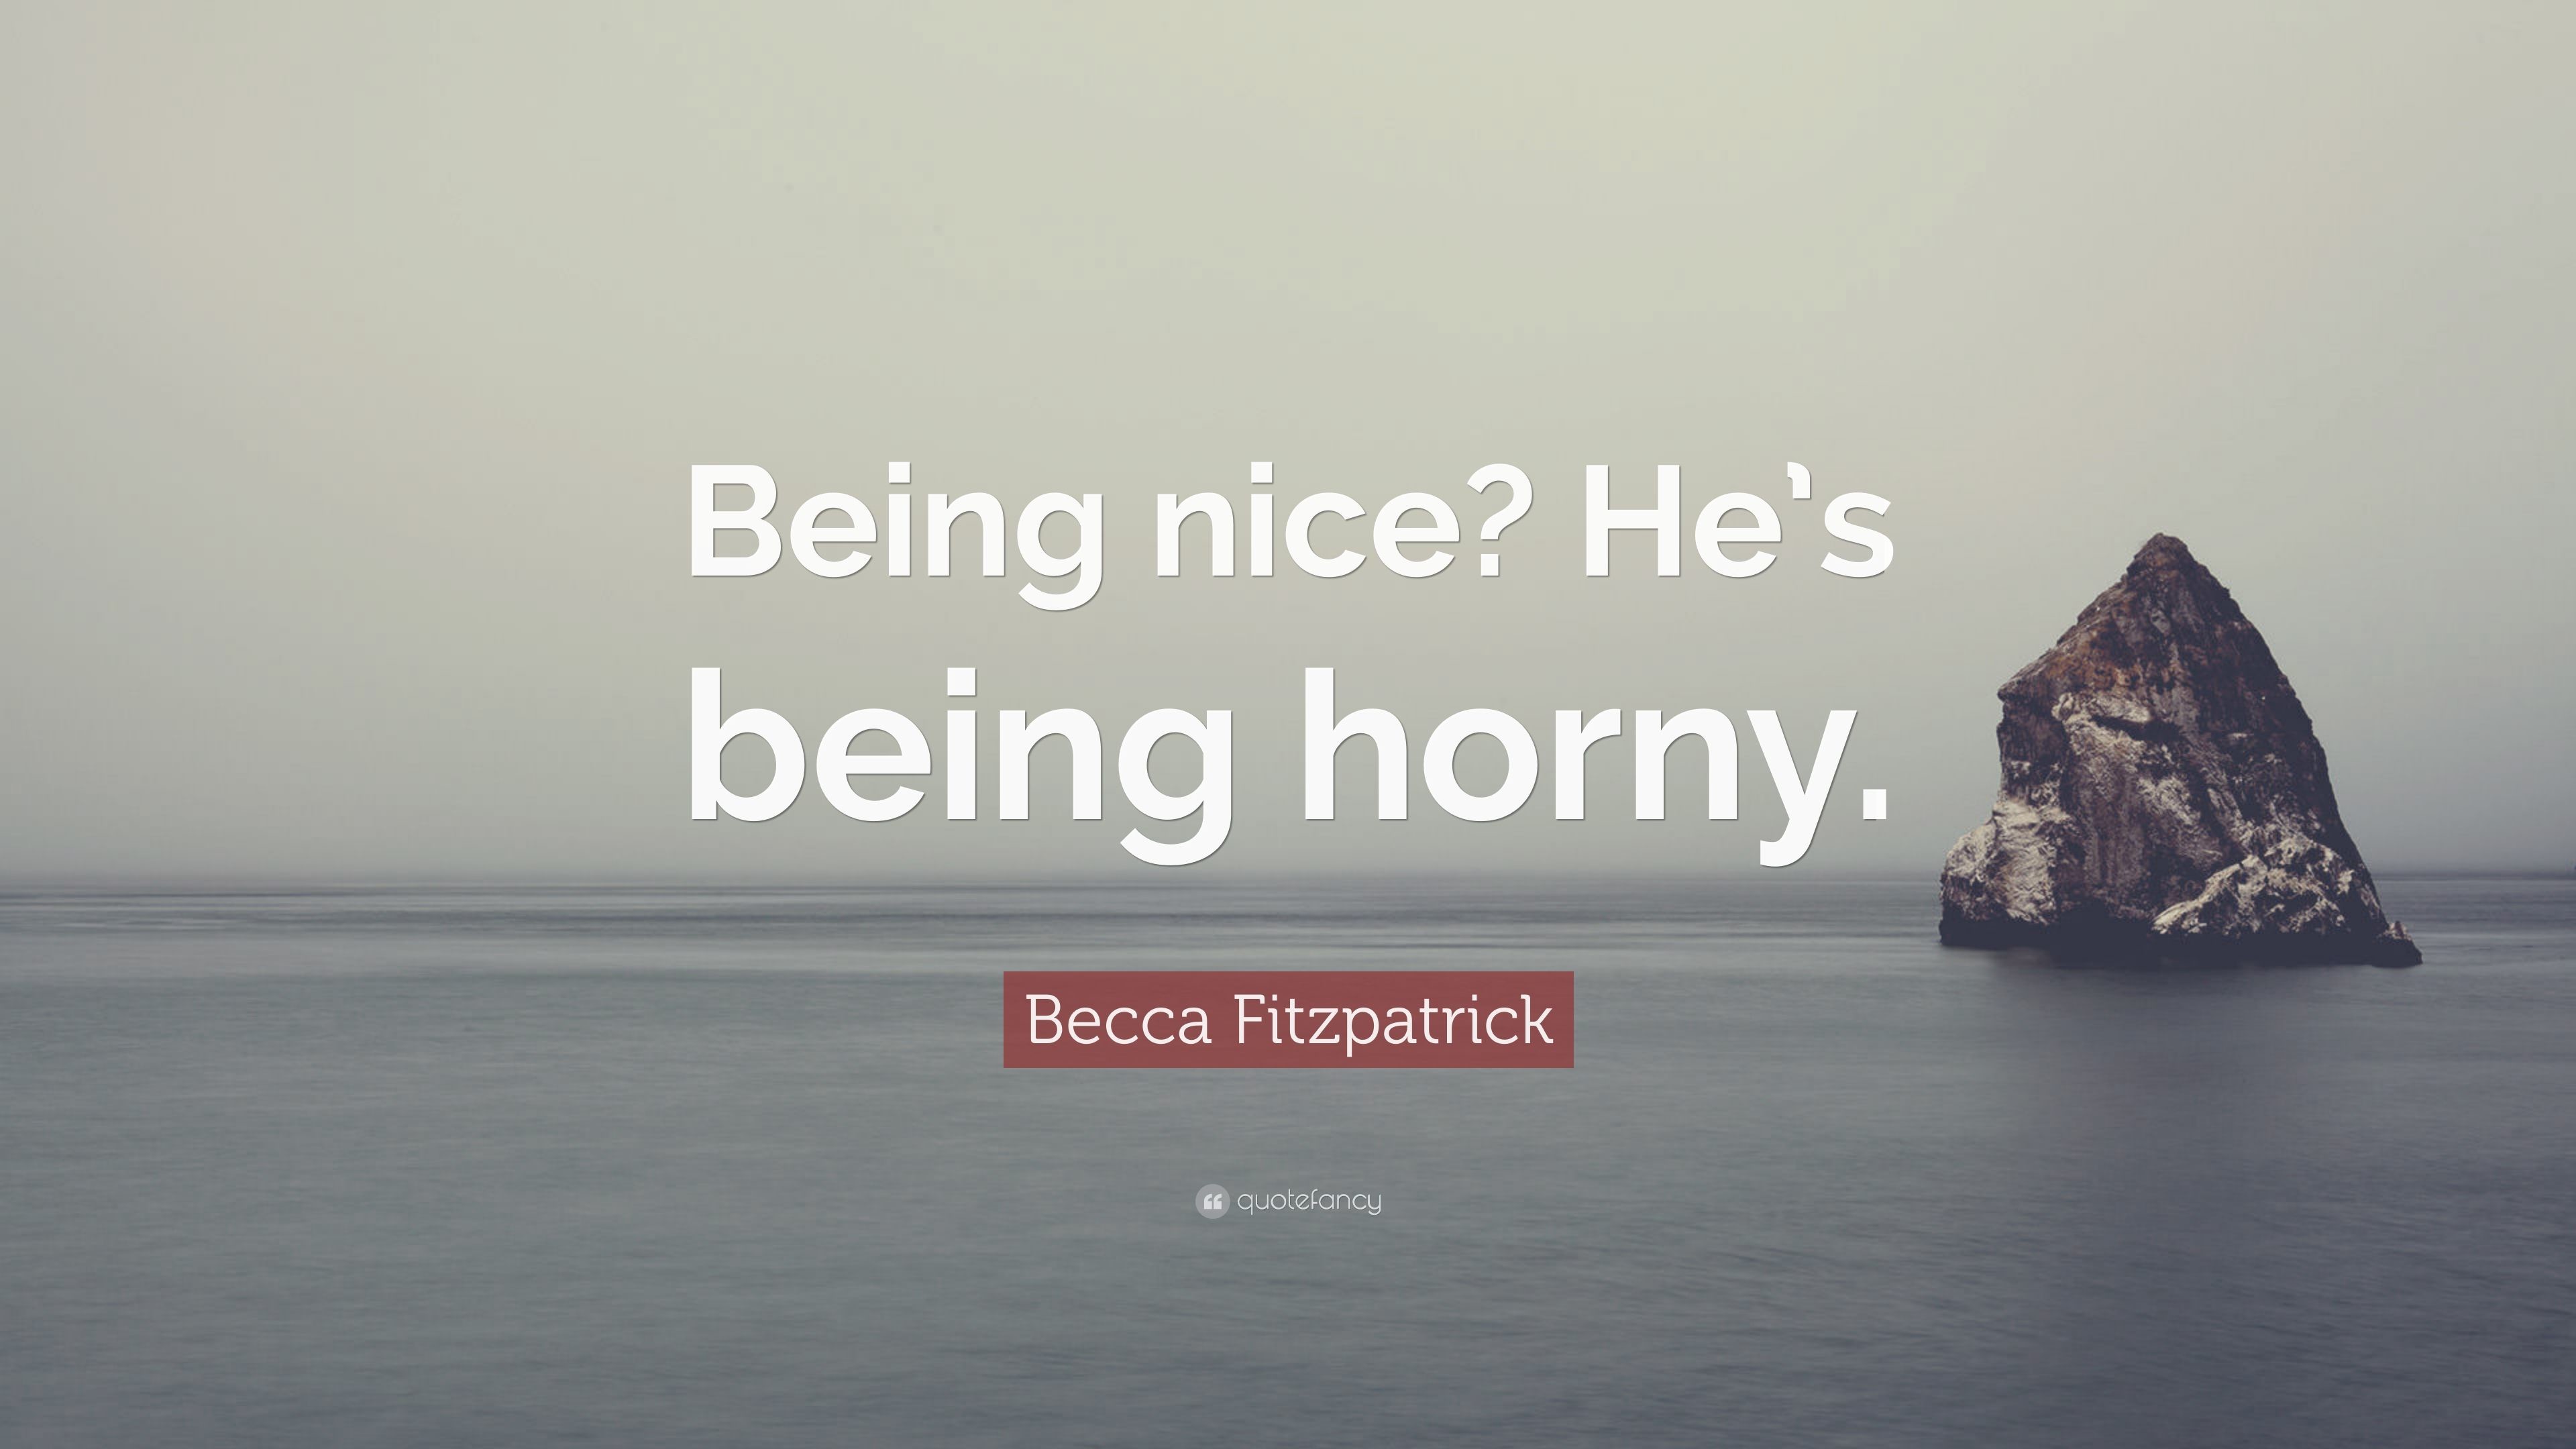 3840x2160 Becca Fitzpatrick Quote: “Being nice? He's being horny.”